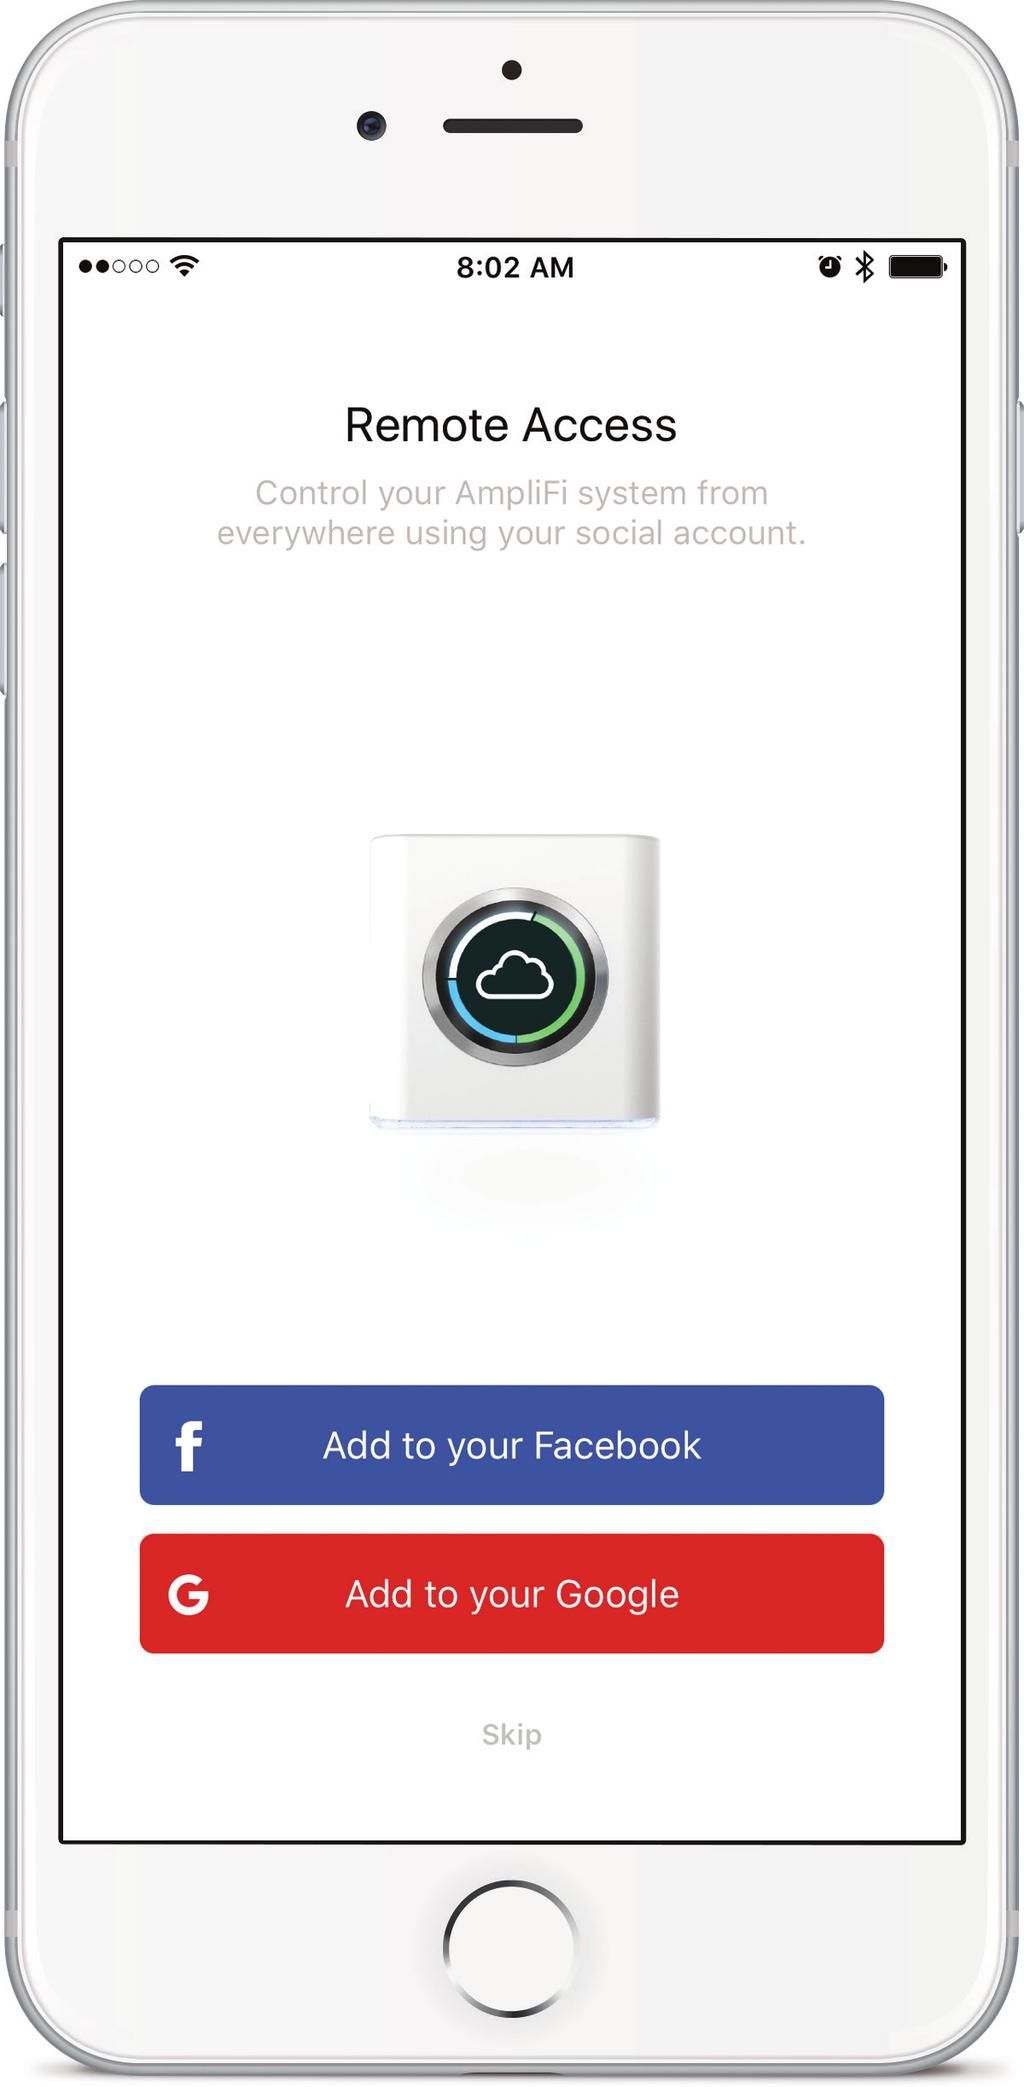 AmpliFi User Guide 7. To enable Remote Access to your AmpliFi system, sign in with one of your accounts to enable access. Otherwise, tap Skip.